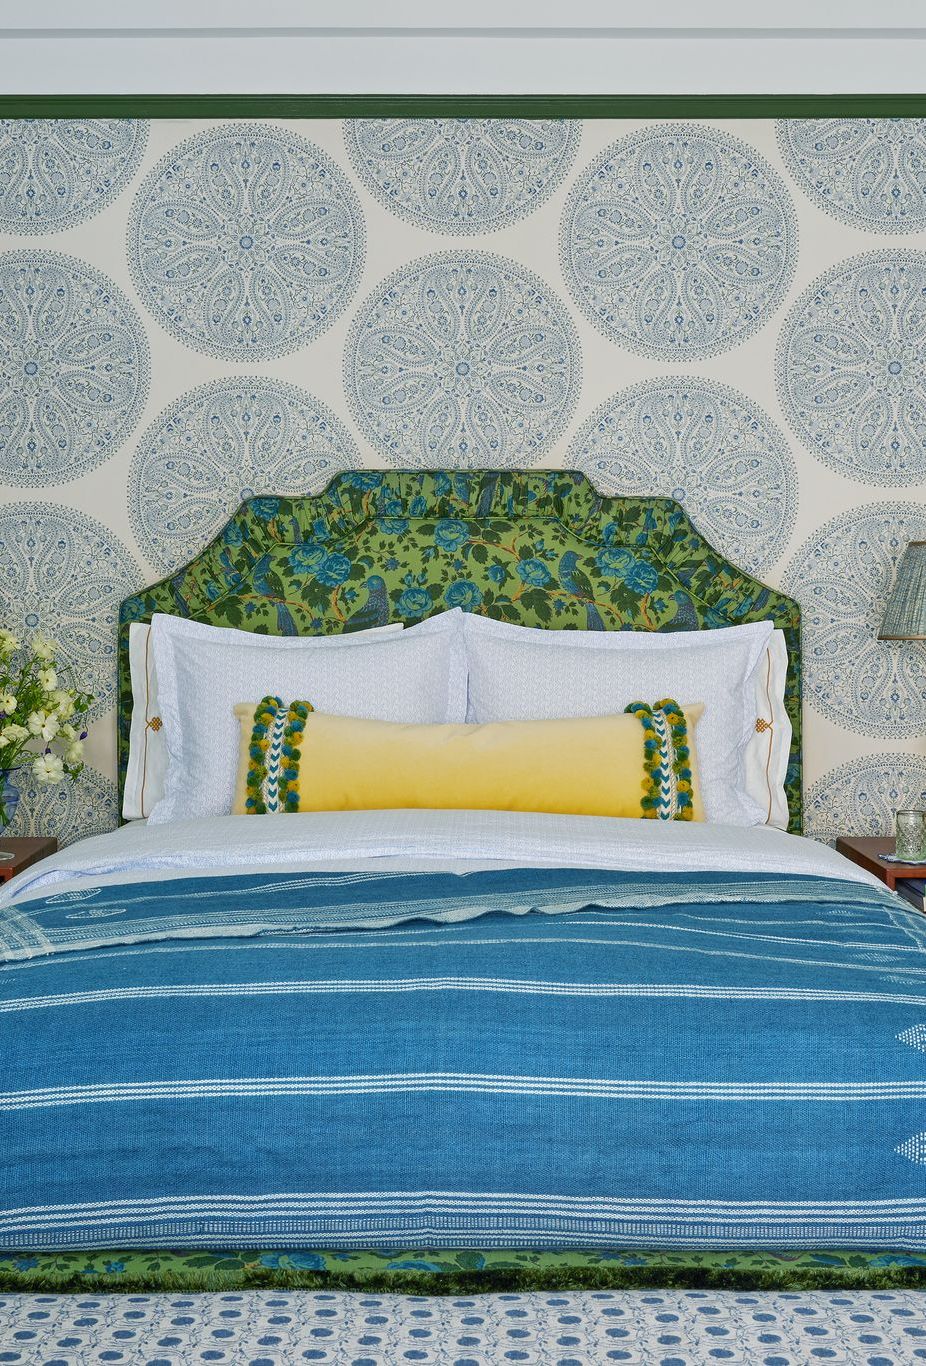 a bed with a blue and yellow comforter